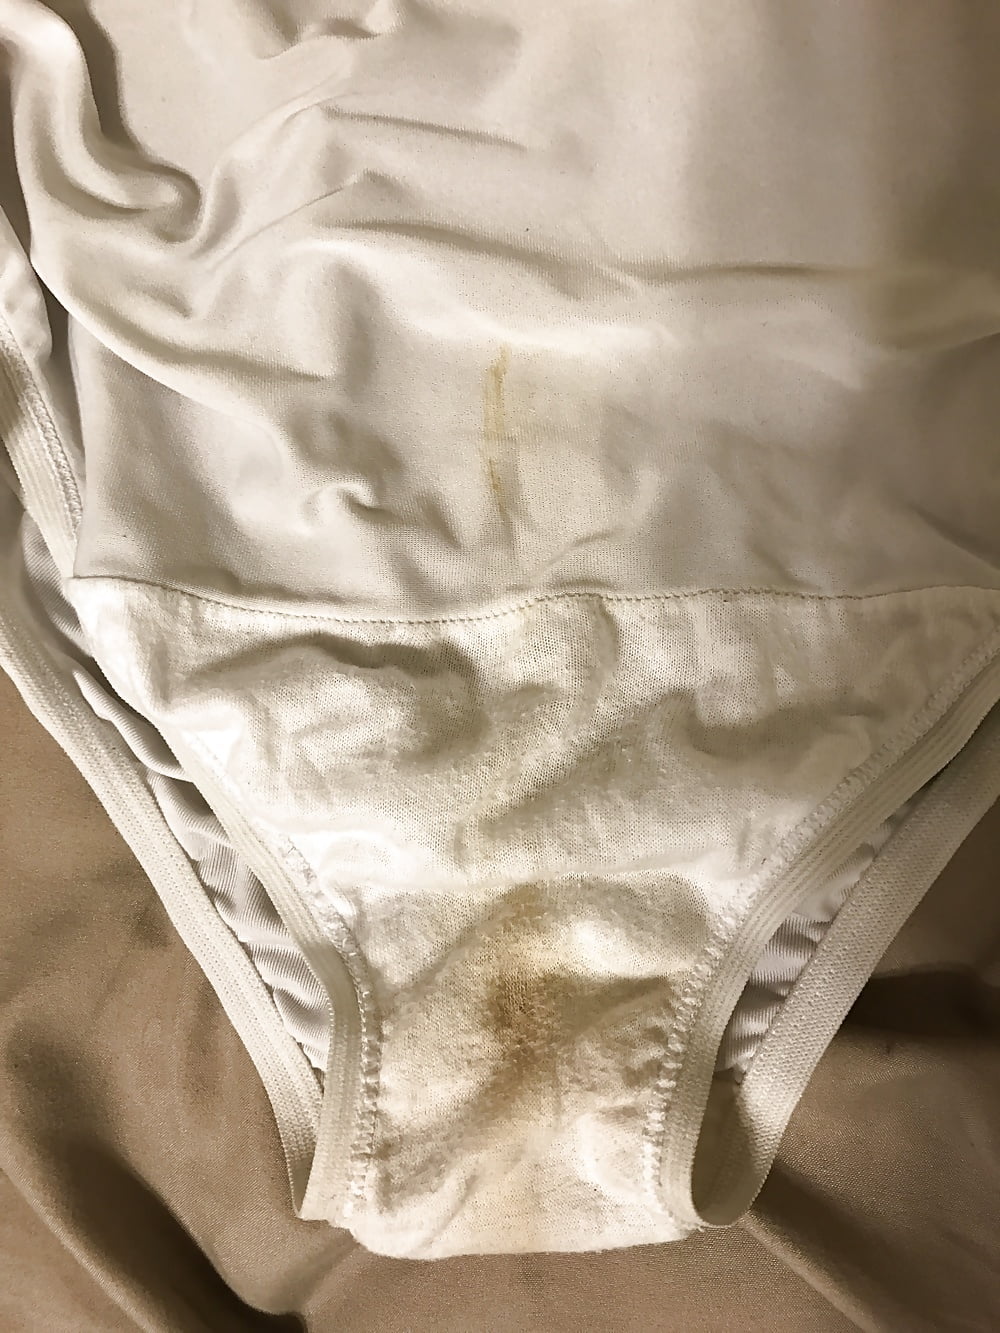 Wife's dirty, smelly panties pict gal